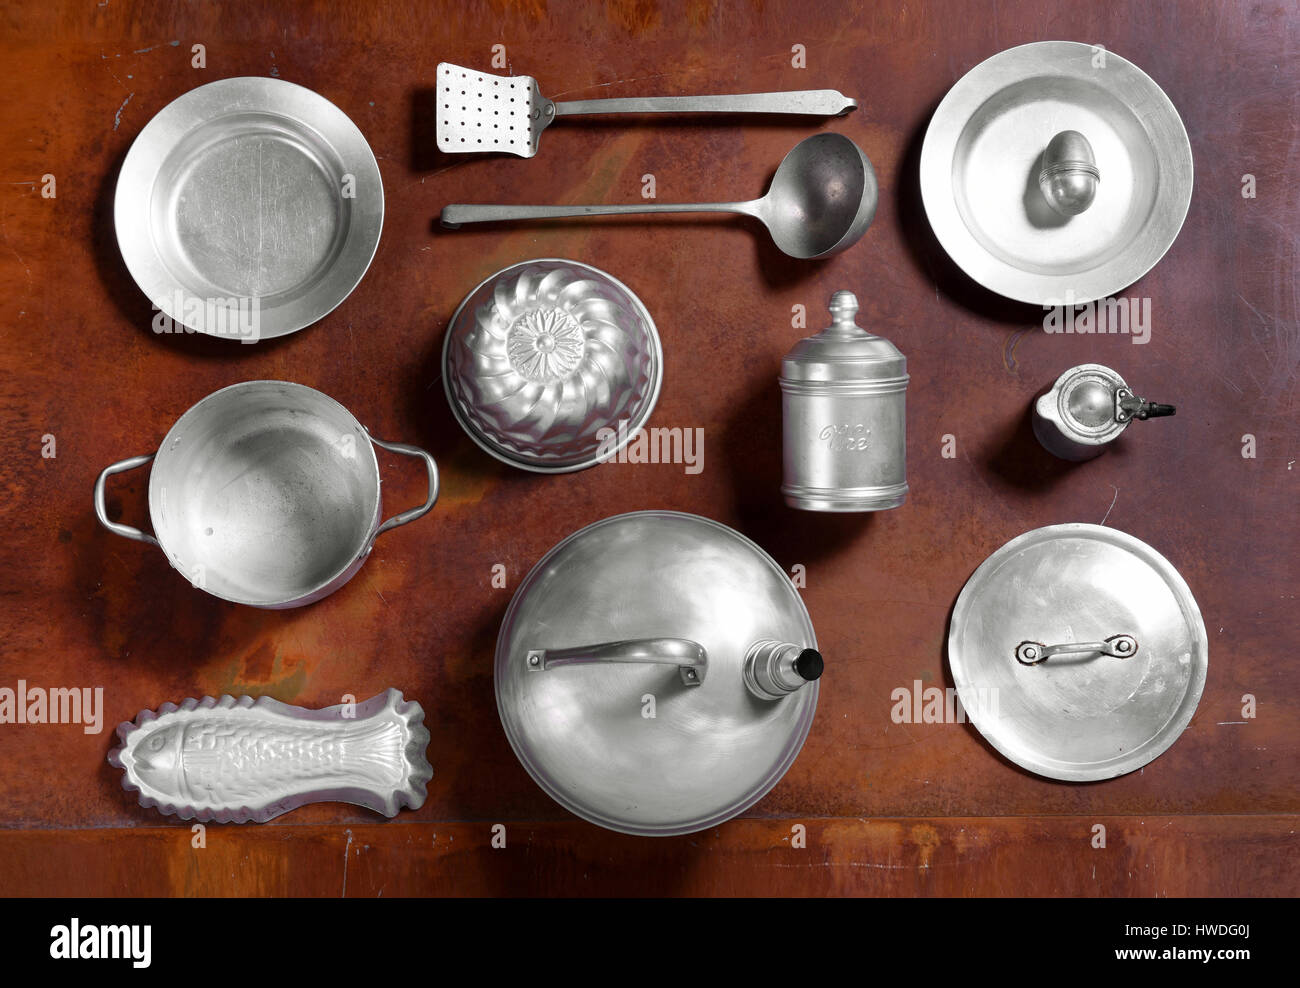 Still life arrangement of aluminium kitchen tools on a wooden table with moulds, kettle, plate, saucepan, lid, dish and cooking utensils in an overhea Stock Photo